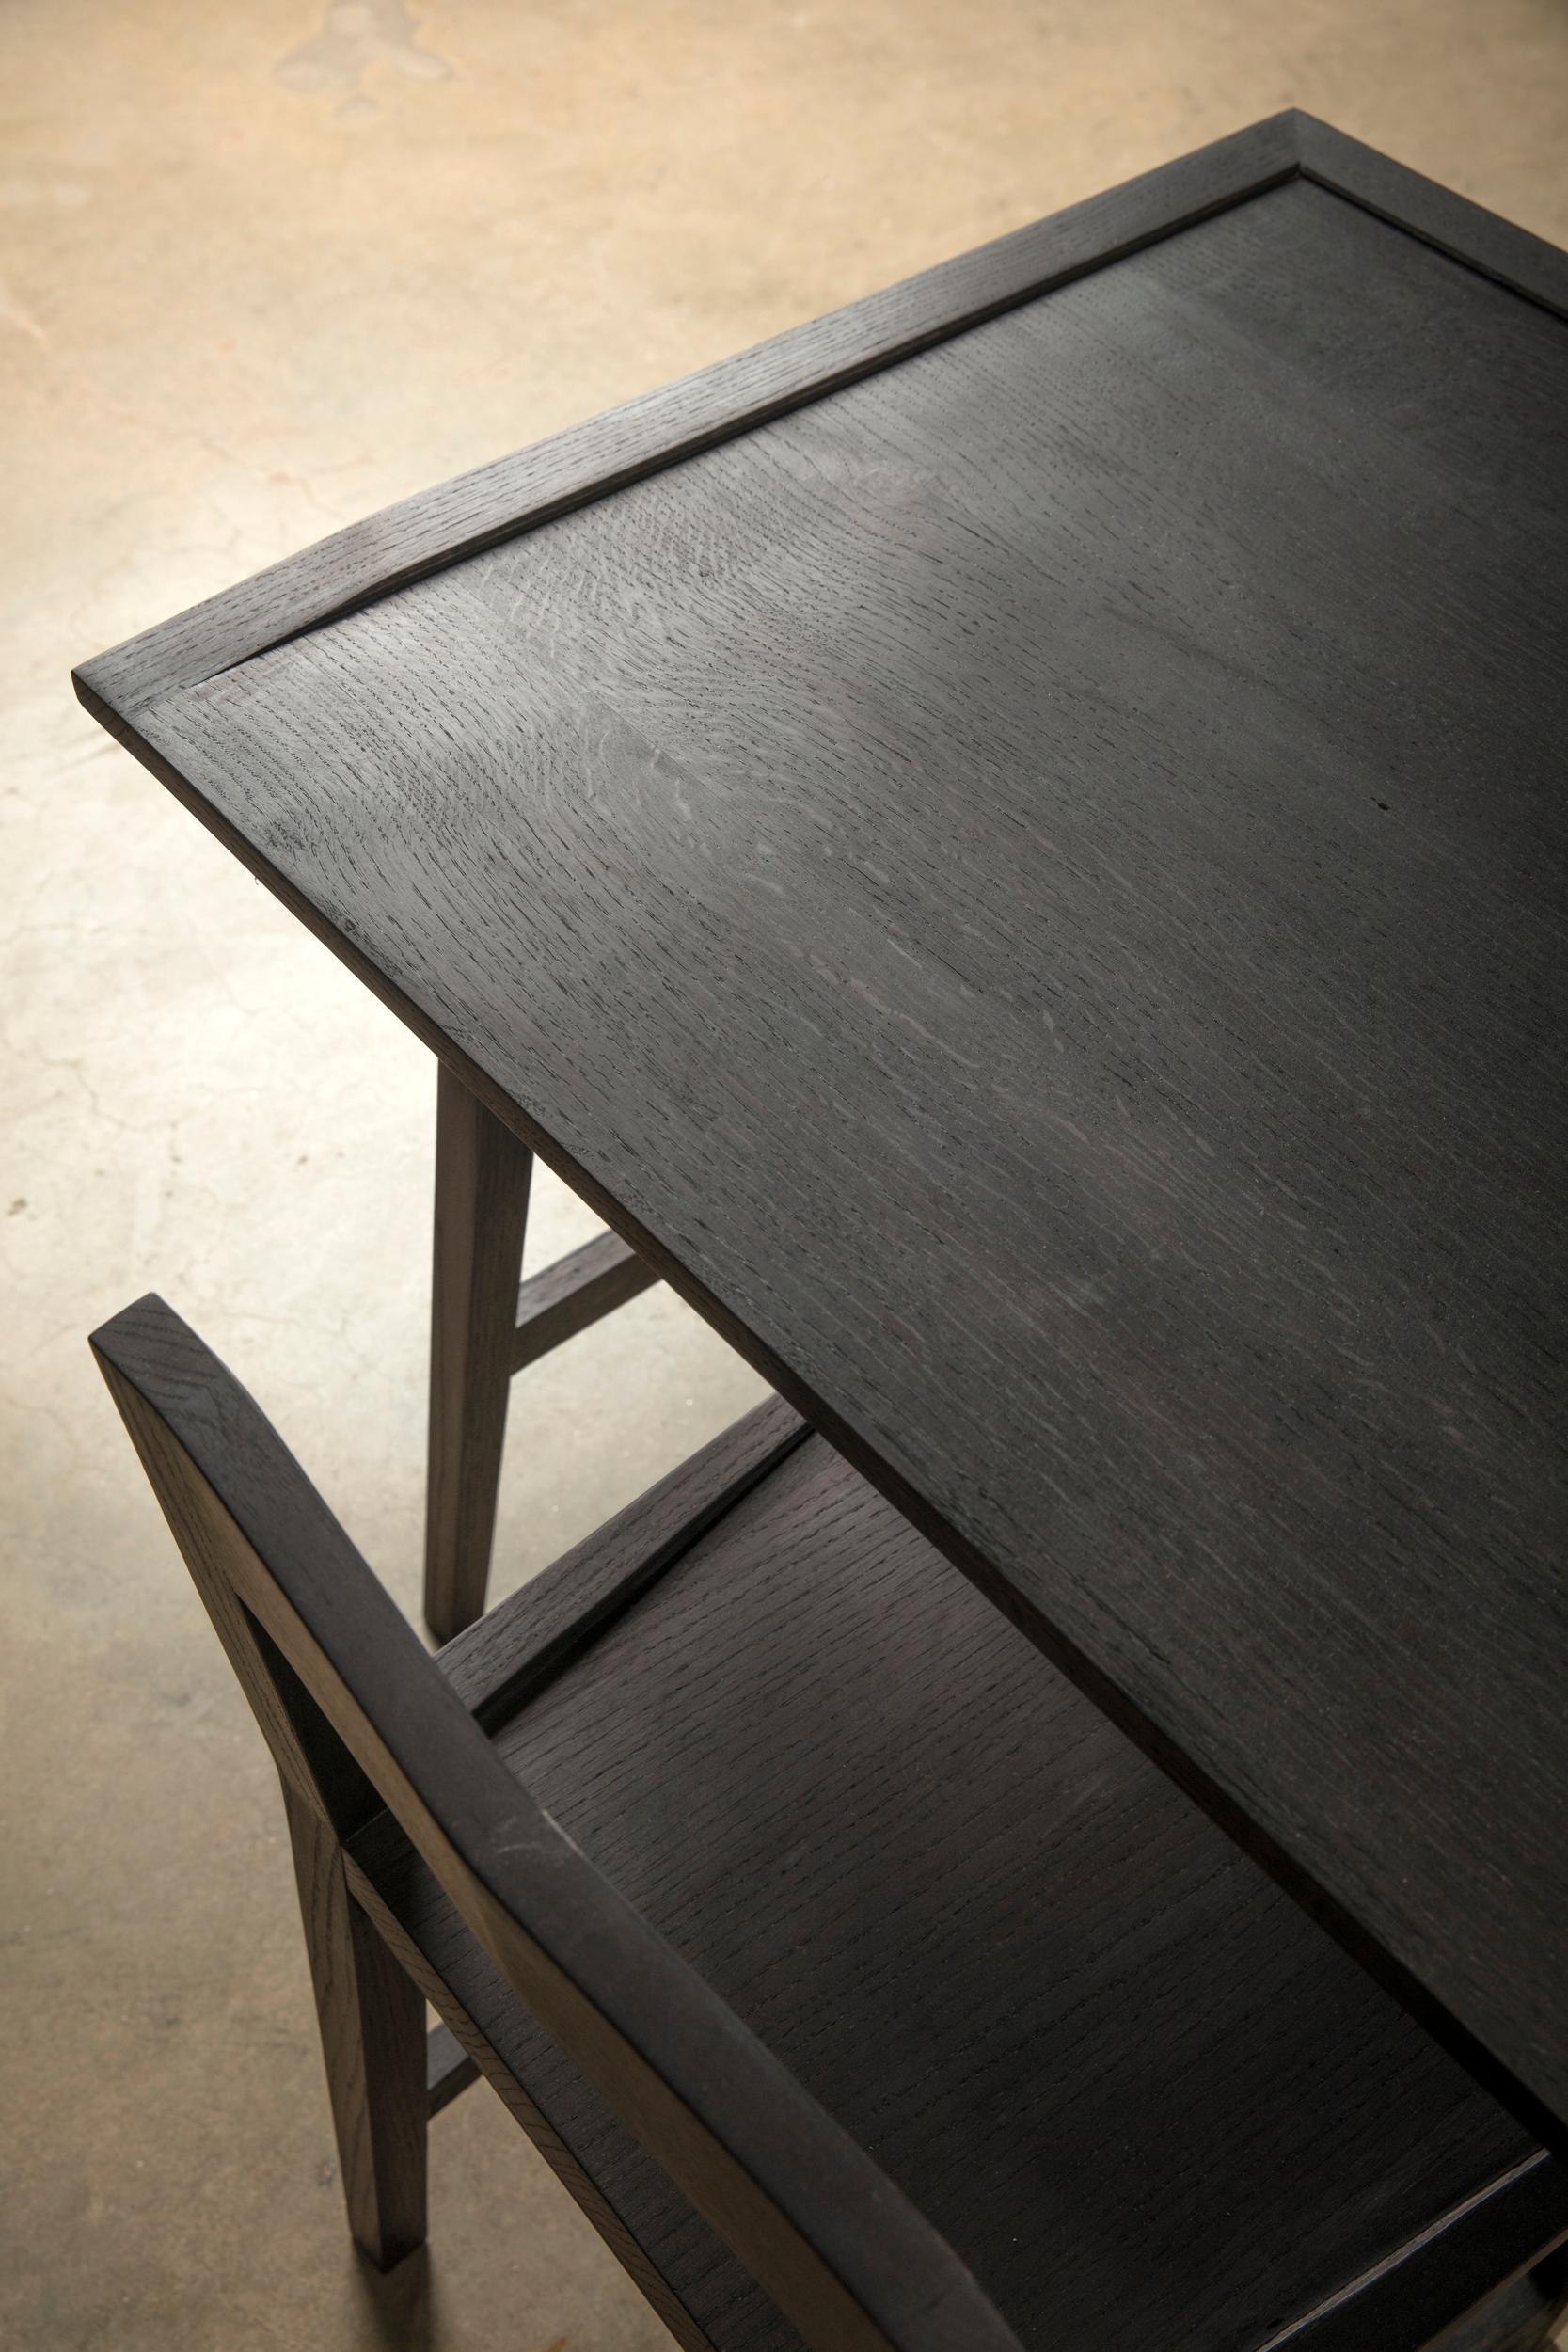 Ebonized Writing or Computer Desk and Chair in Blackened Oakwood by Alabama Sawyer